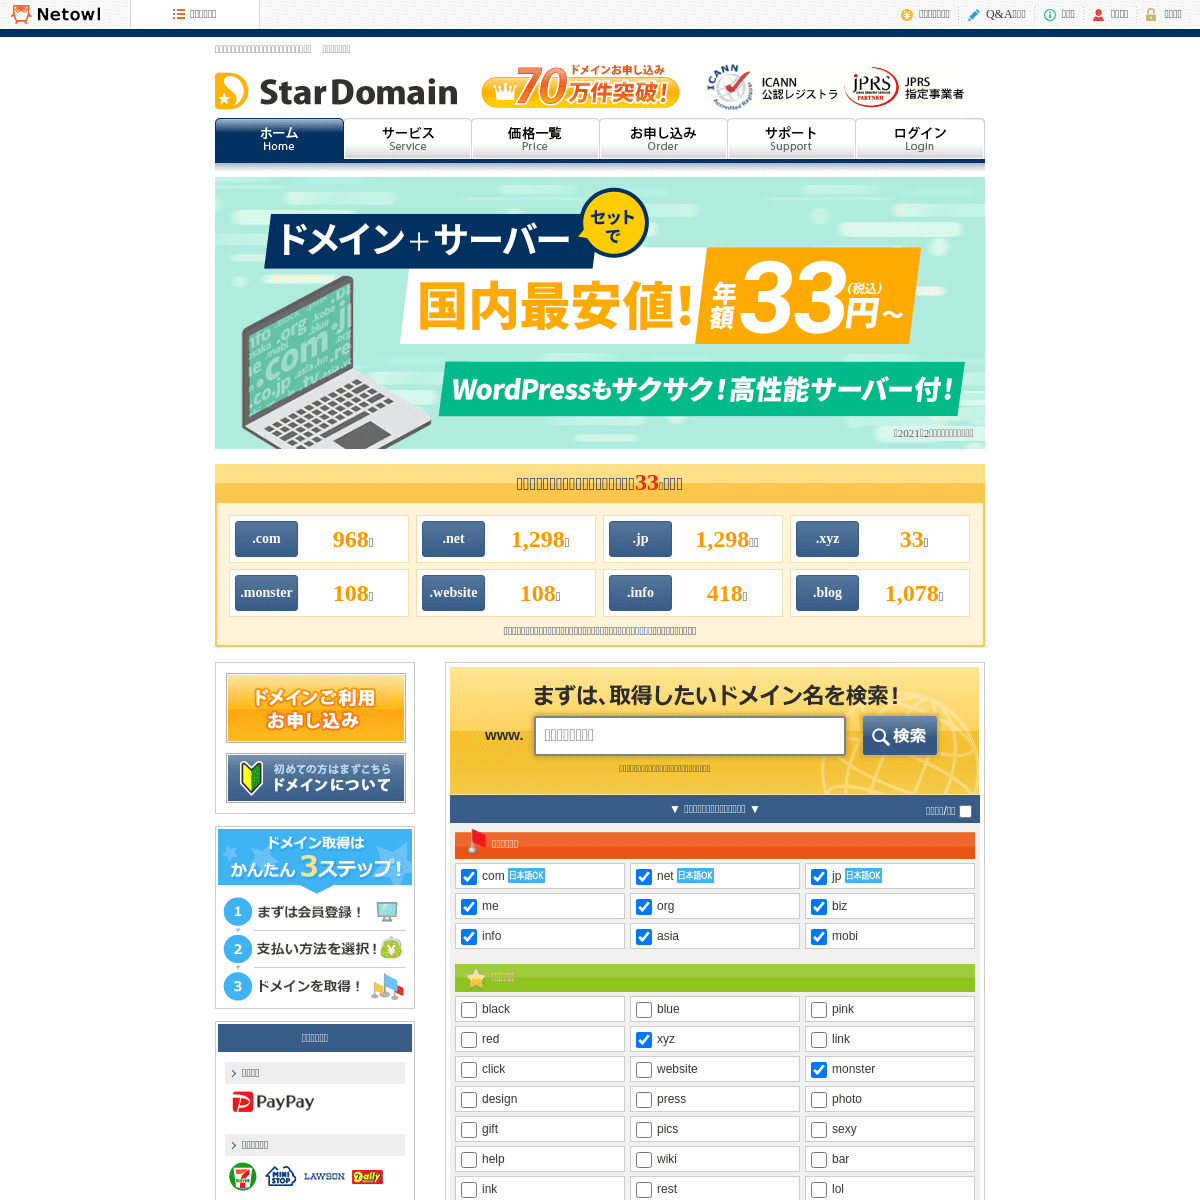 A complete backup of https://star-domain.jp